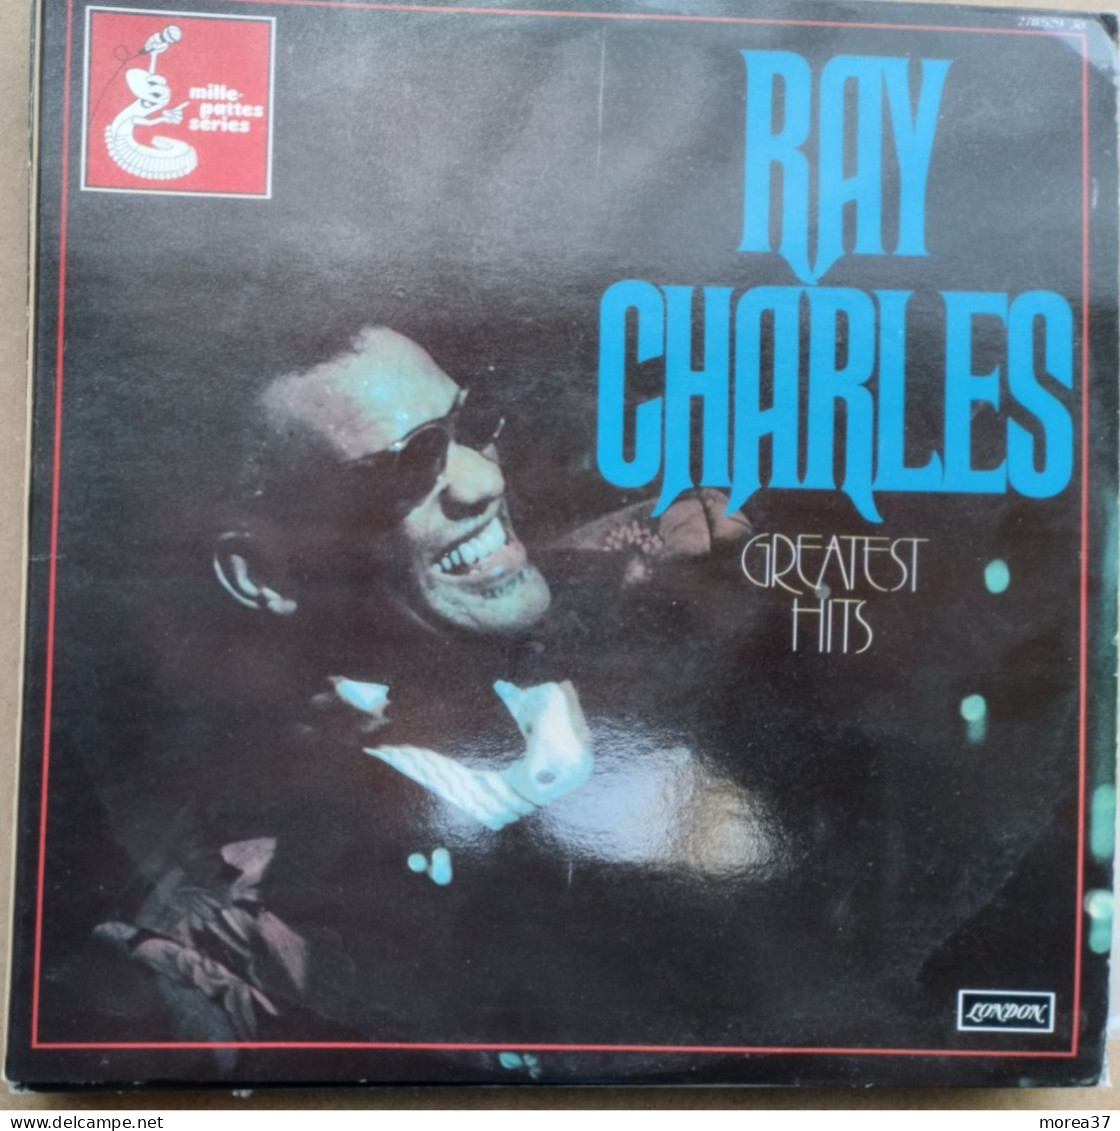 RAY CHARLES Greatest Hits   2 LP   LONDON 278529 30 (CM3) - Autres - Musique Anglaise